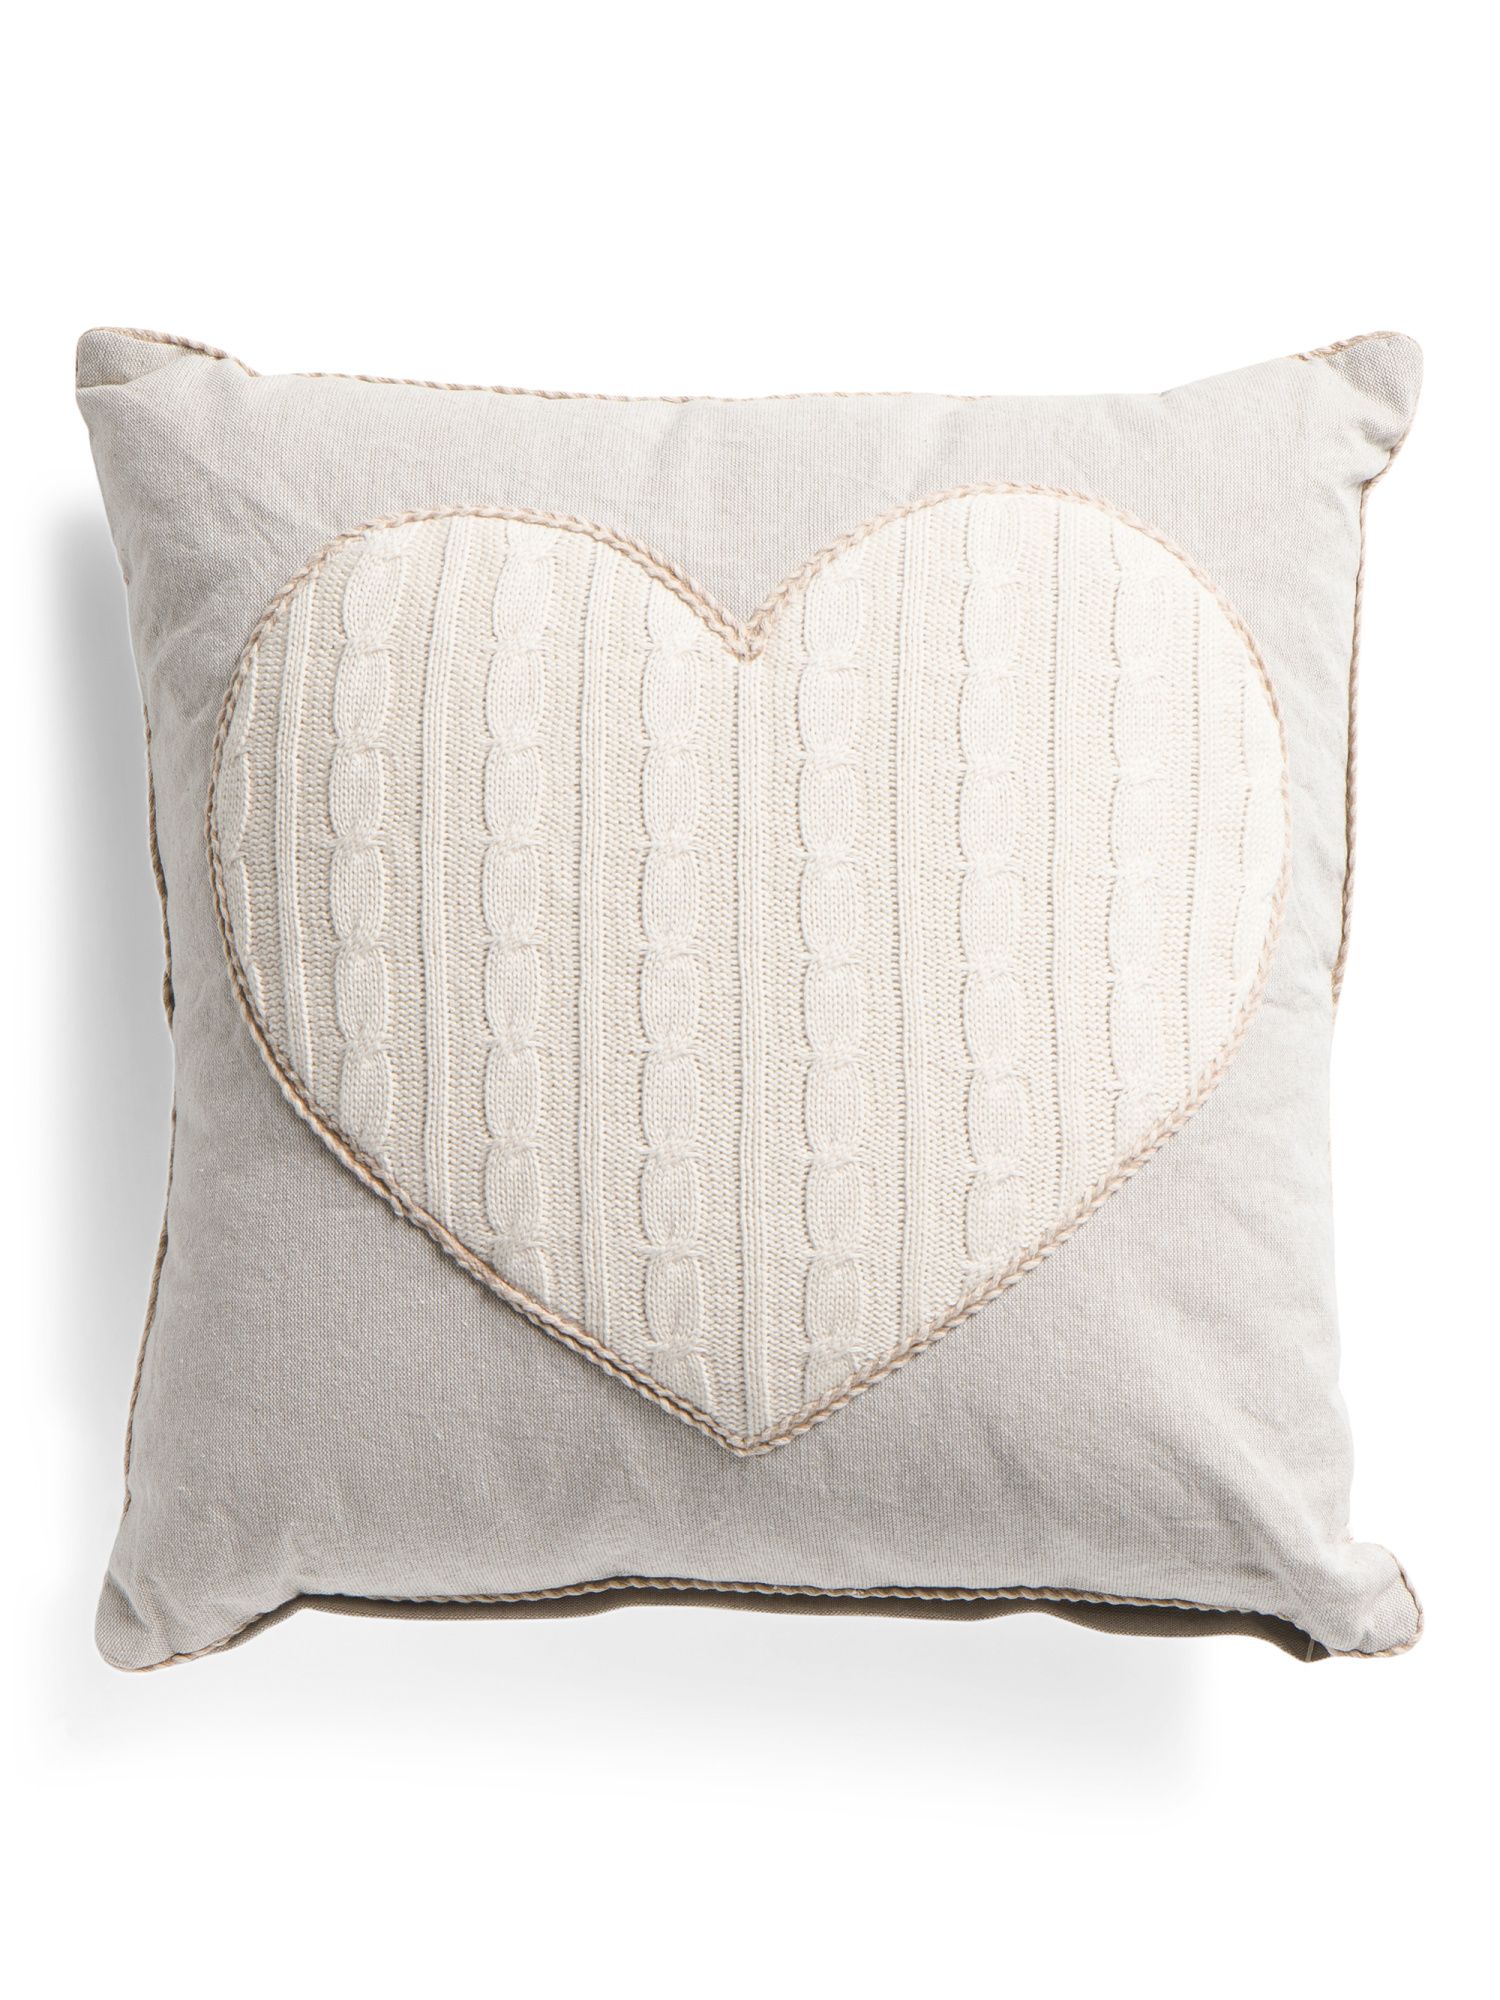 18x18 Knitted Heart Pillow | The Global Decor Shop | Marshalls | Marshalls